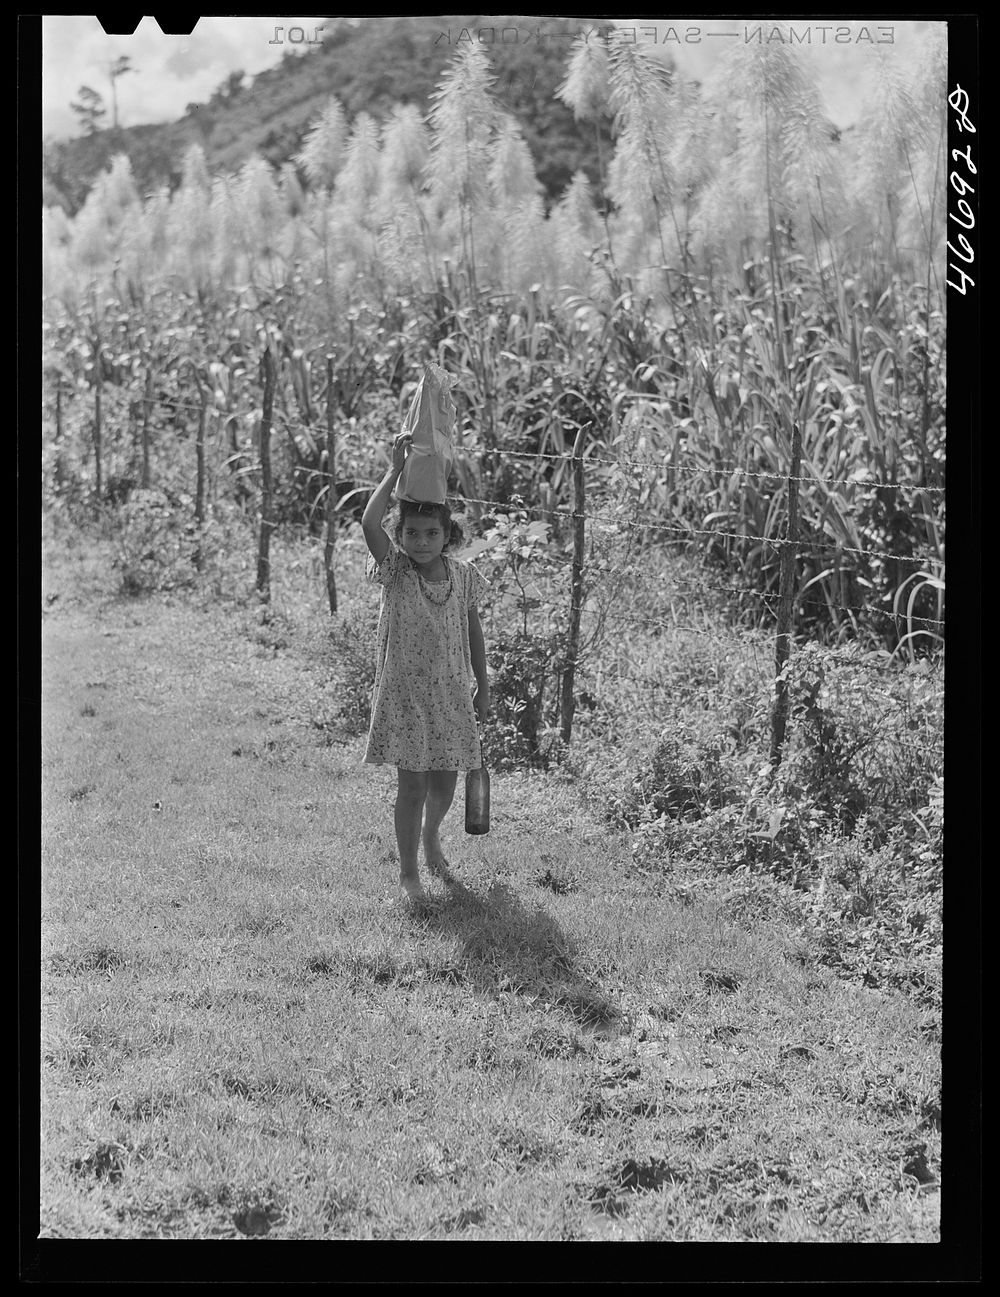 Bayamon, Puerto Rico (vicinity). Carrying groceries from the store on a farm. Sourced from the Library of Congress.